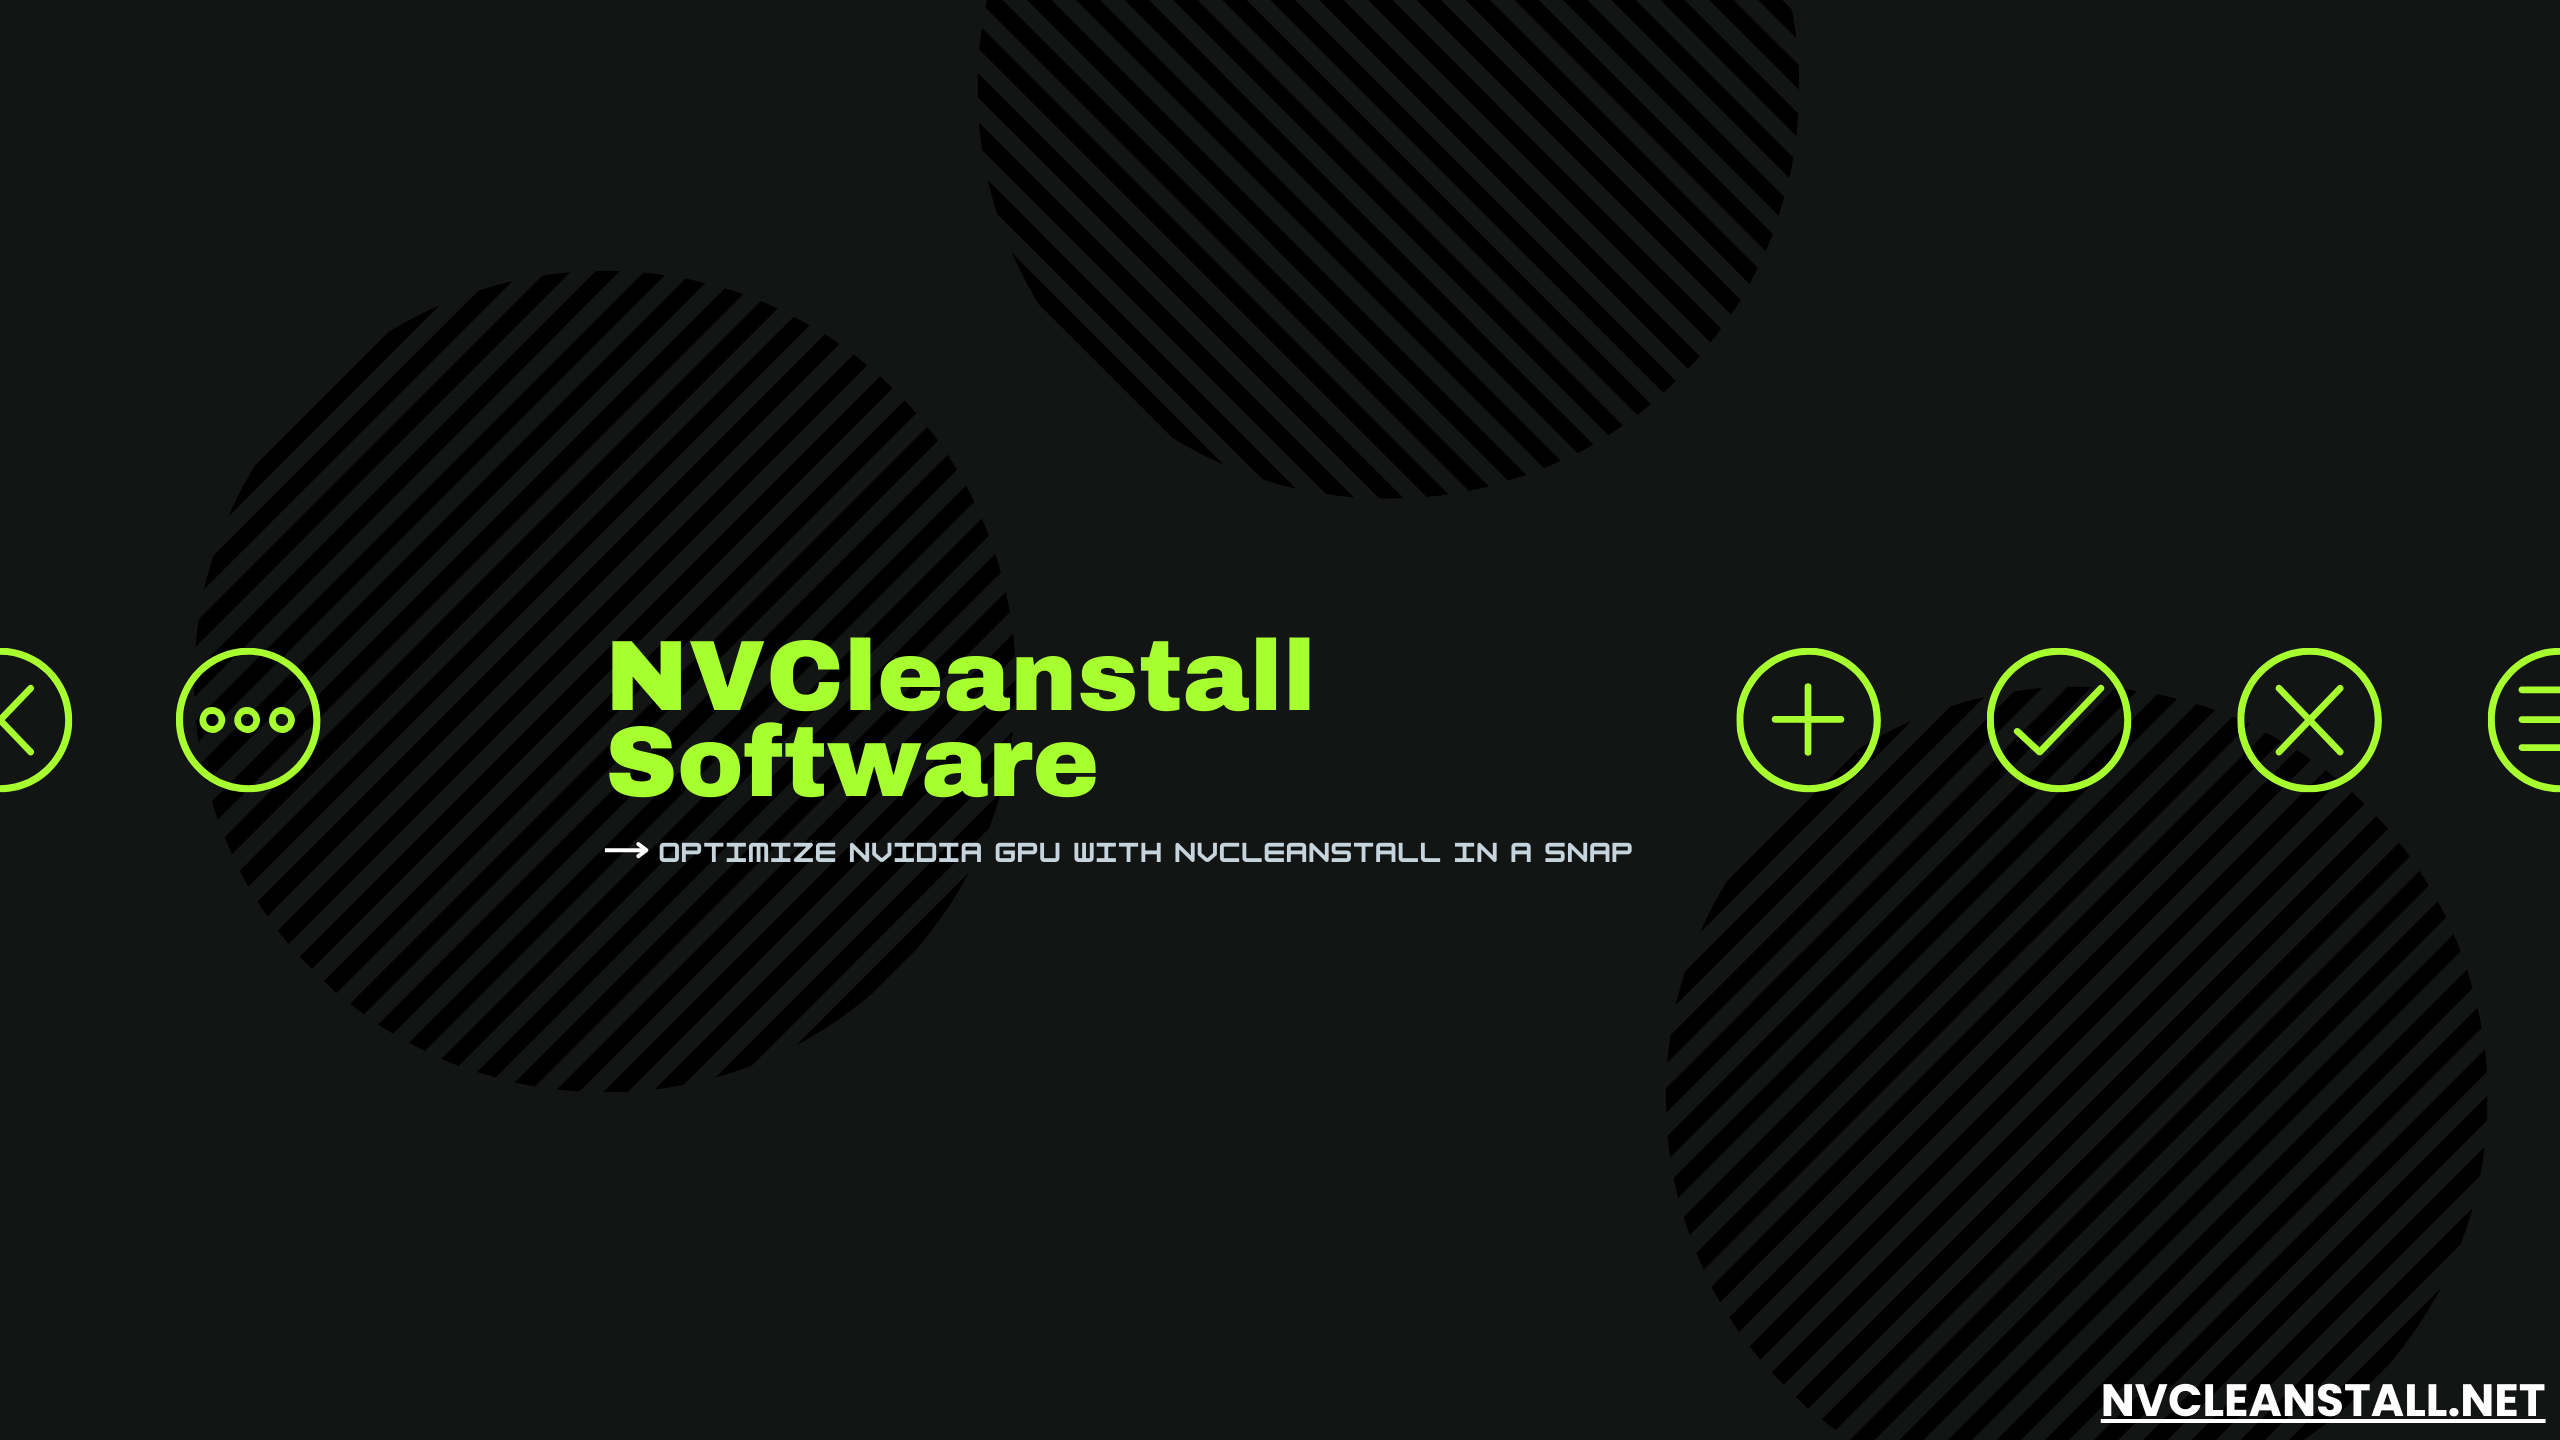 NVCleanstall.net